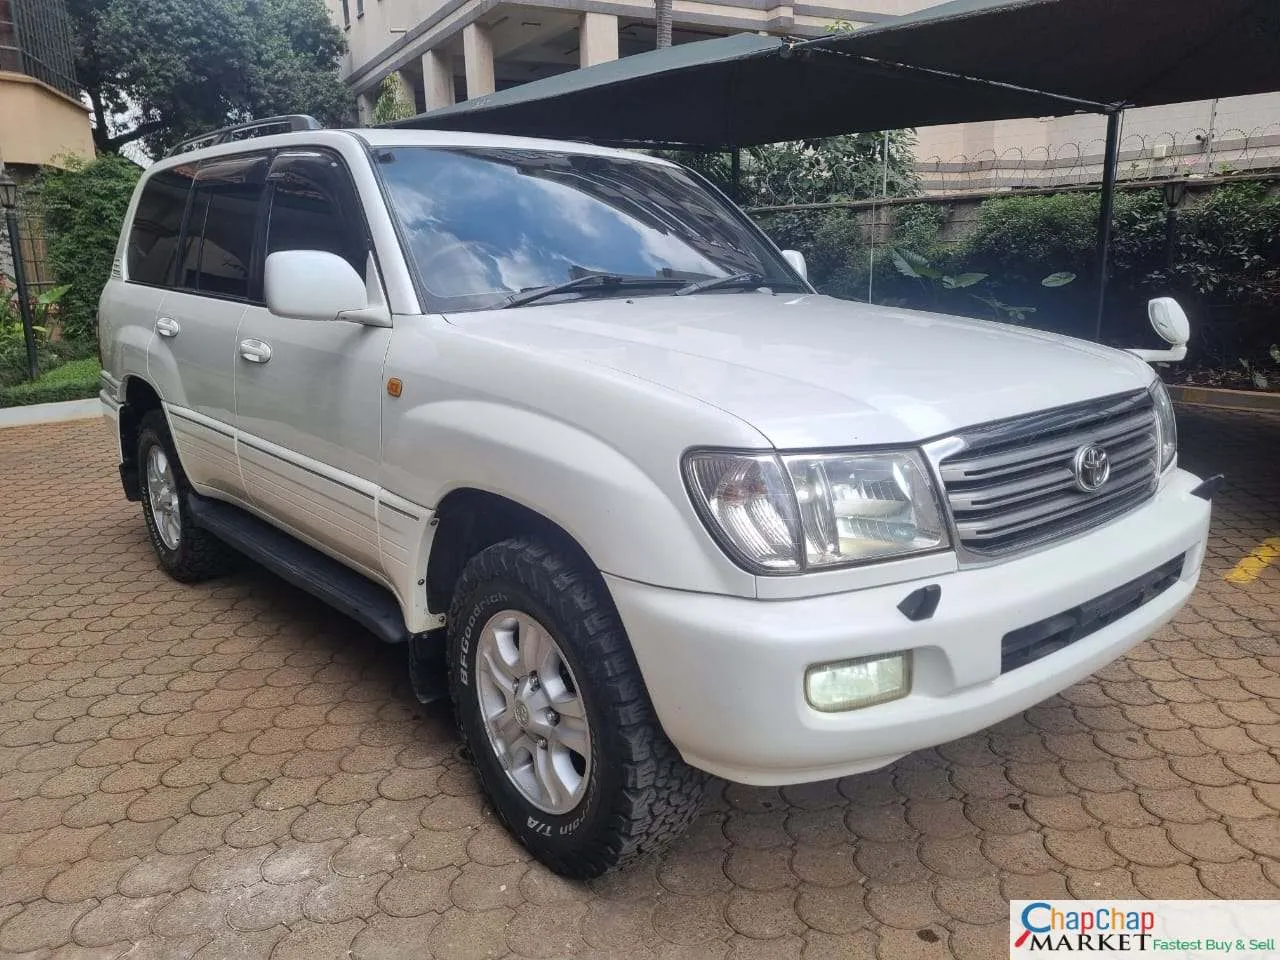 Toyota Landcruiser V8 100 SERIES You Pay 30% Deposit Trade in Ok Amazon 100 series for sale in kenya hire purchase installments EXCLUSIVE